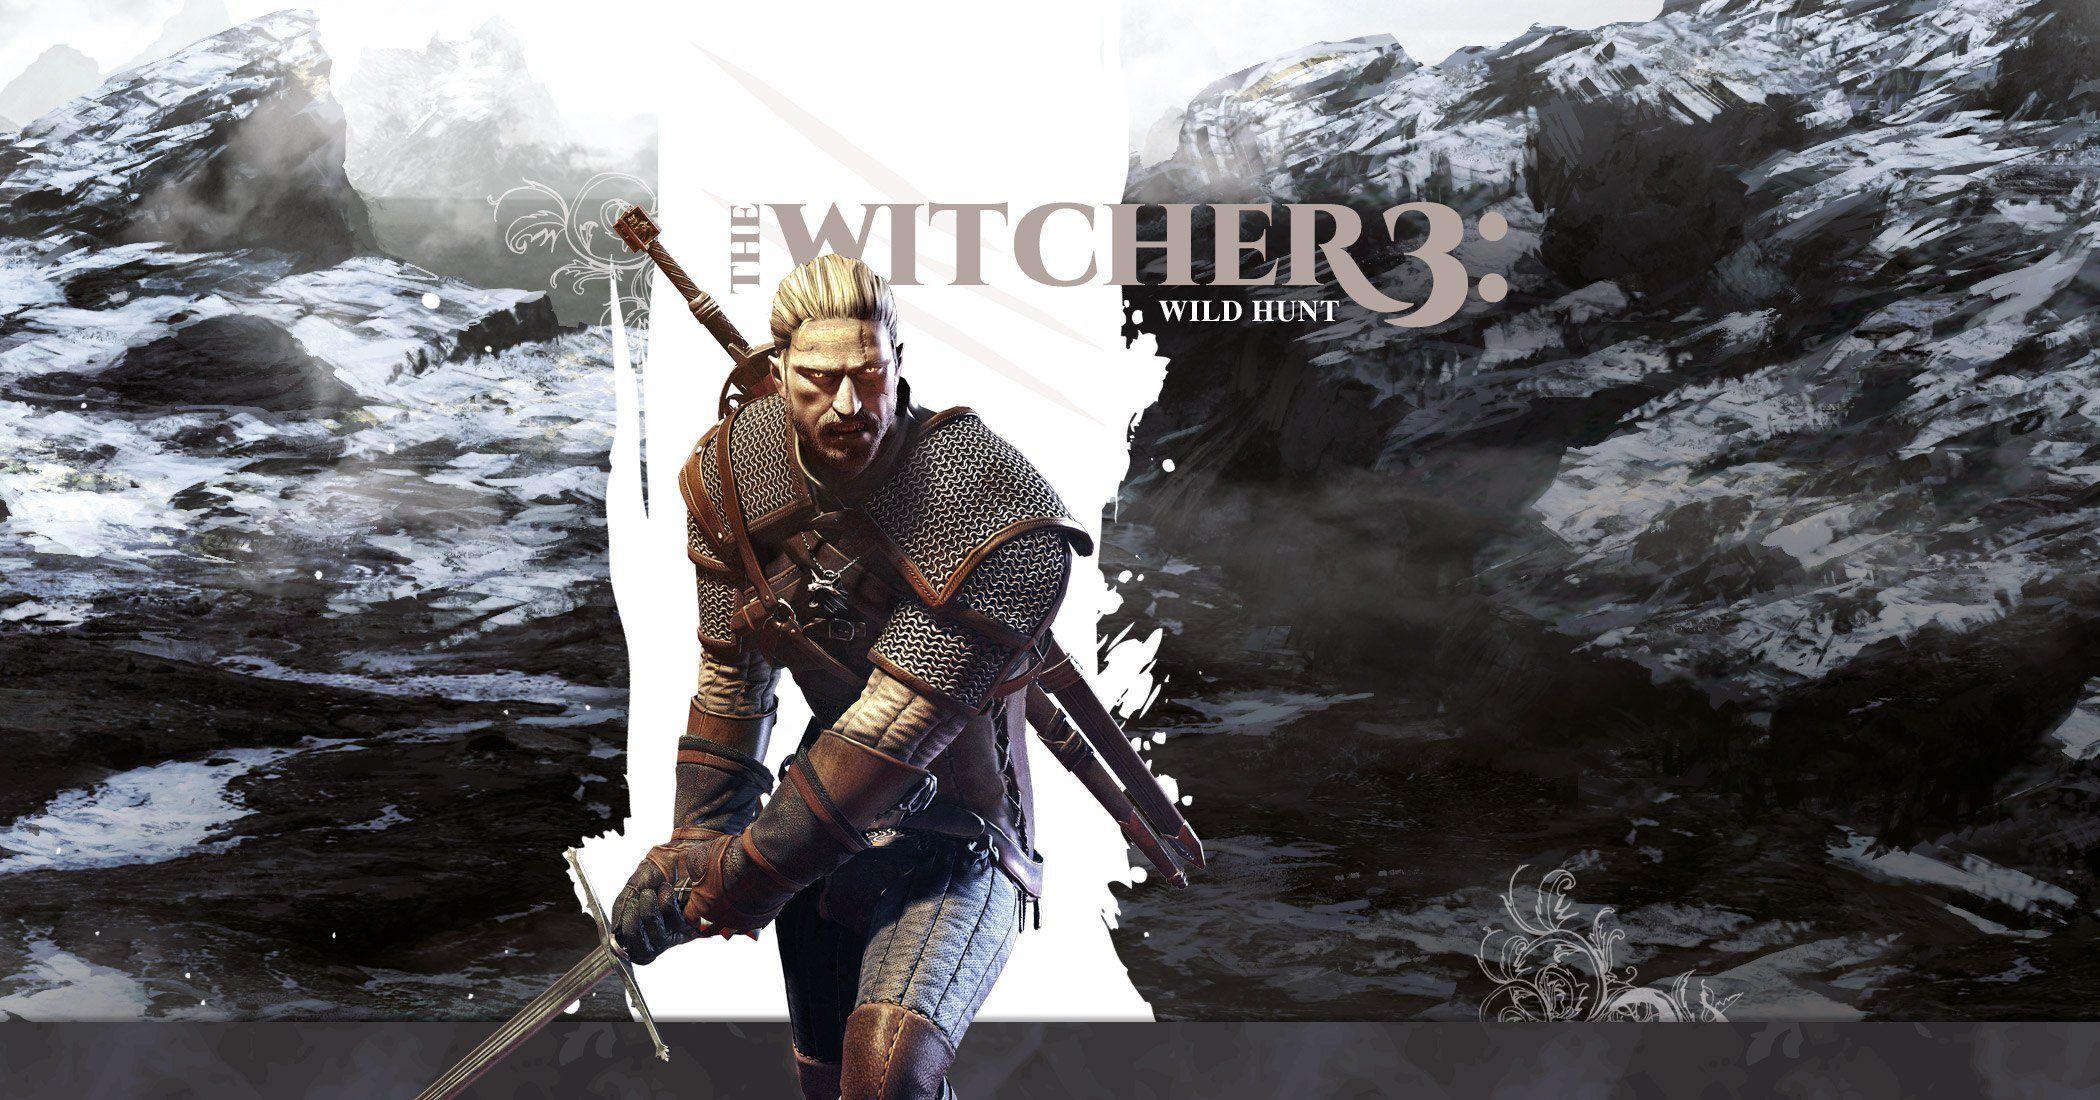 The Witcher 3 Wild Hunt Wallpaper HD